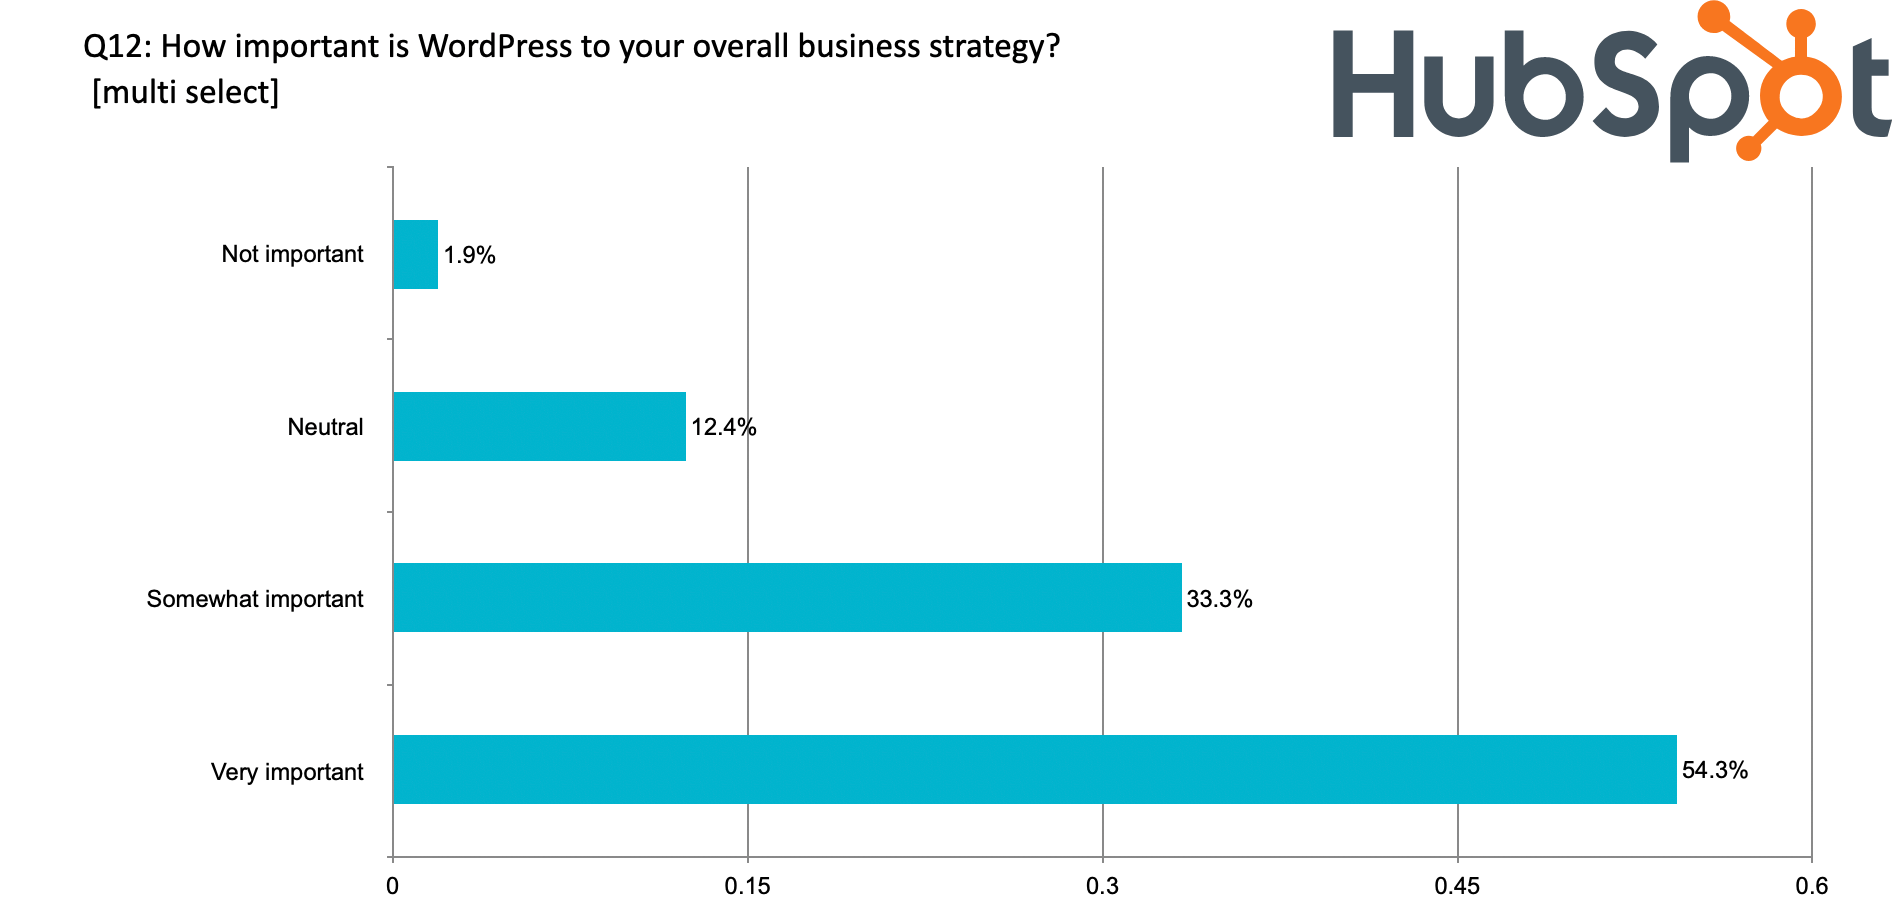 how important is wordpress to your overall business strategy? 54.3% say Very Important, 33.3% say 'somewhat important', 12.4% are neutral, and 1.9% say not important